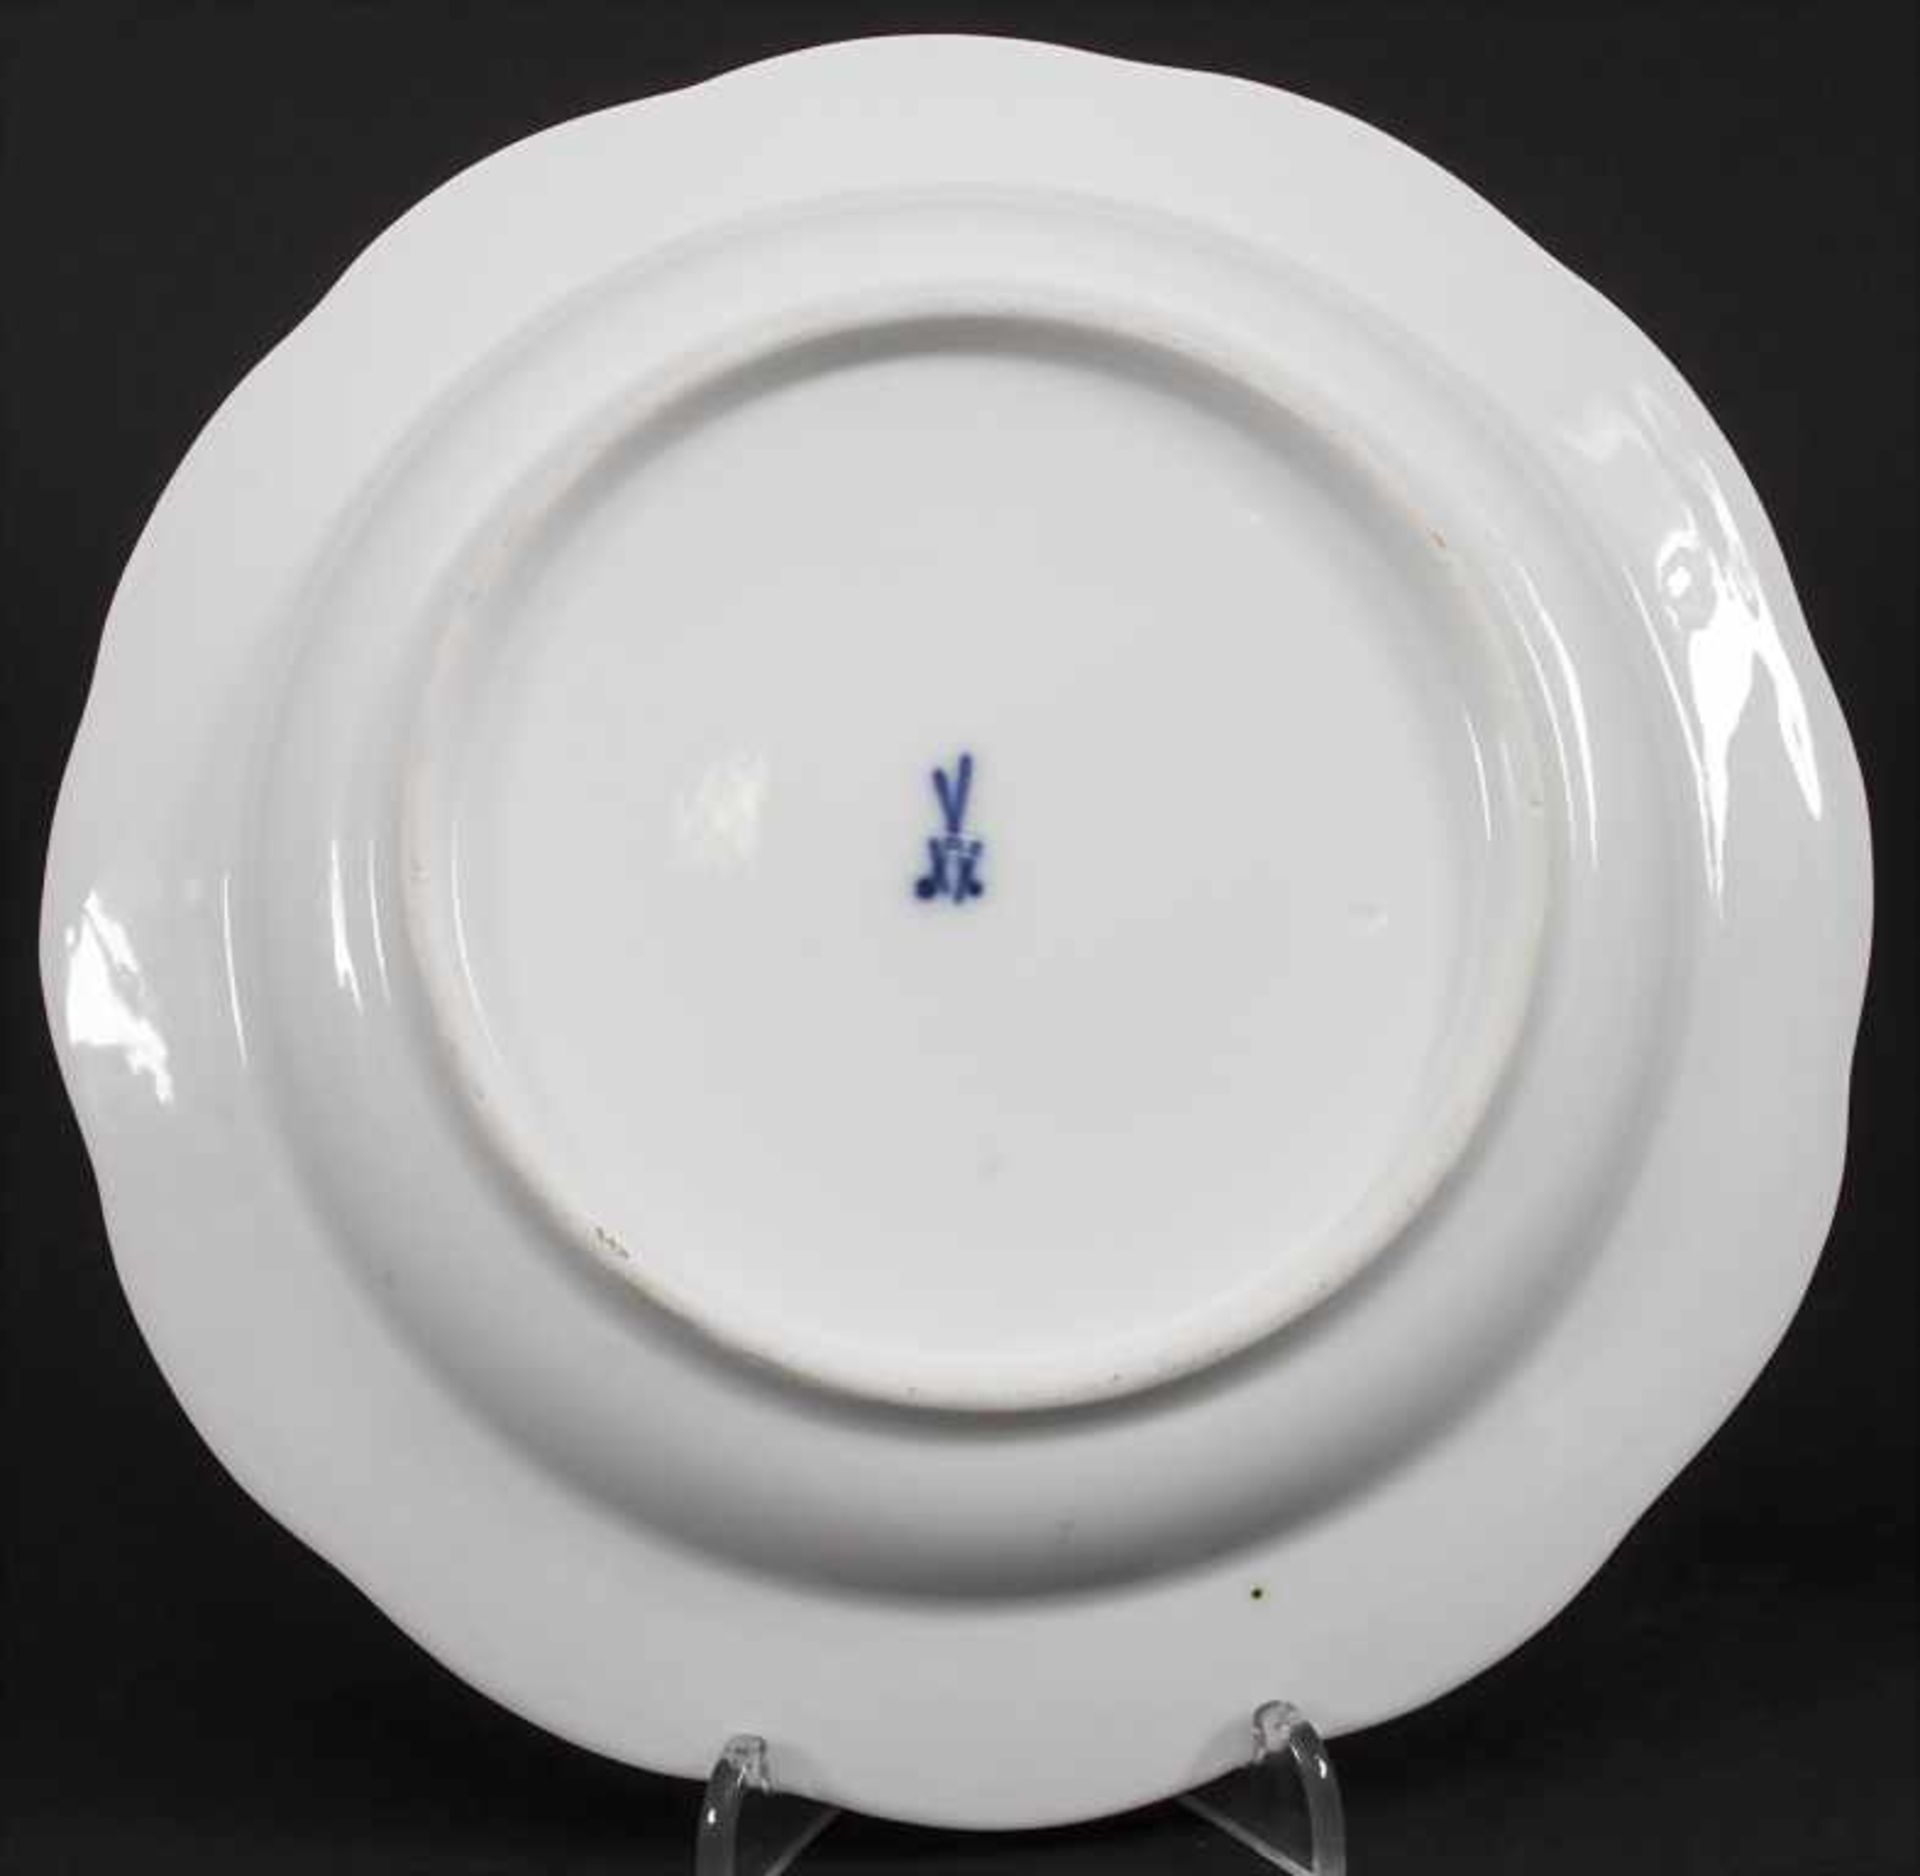 Gedeck mit Blumenmalerei / A place setting with flowers, Meissen, nach 1934 - Image 7 of 12